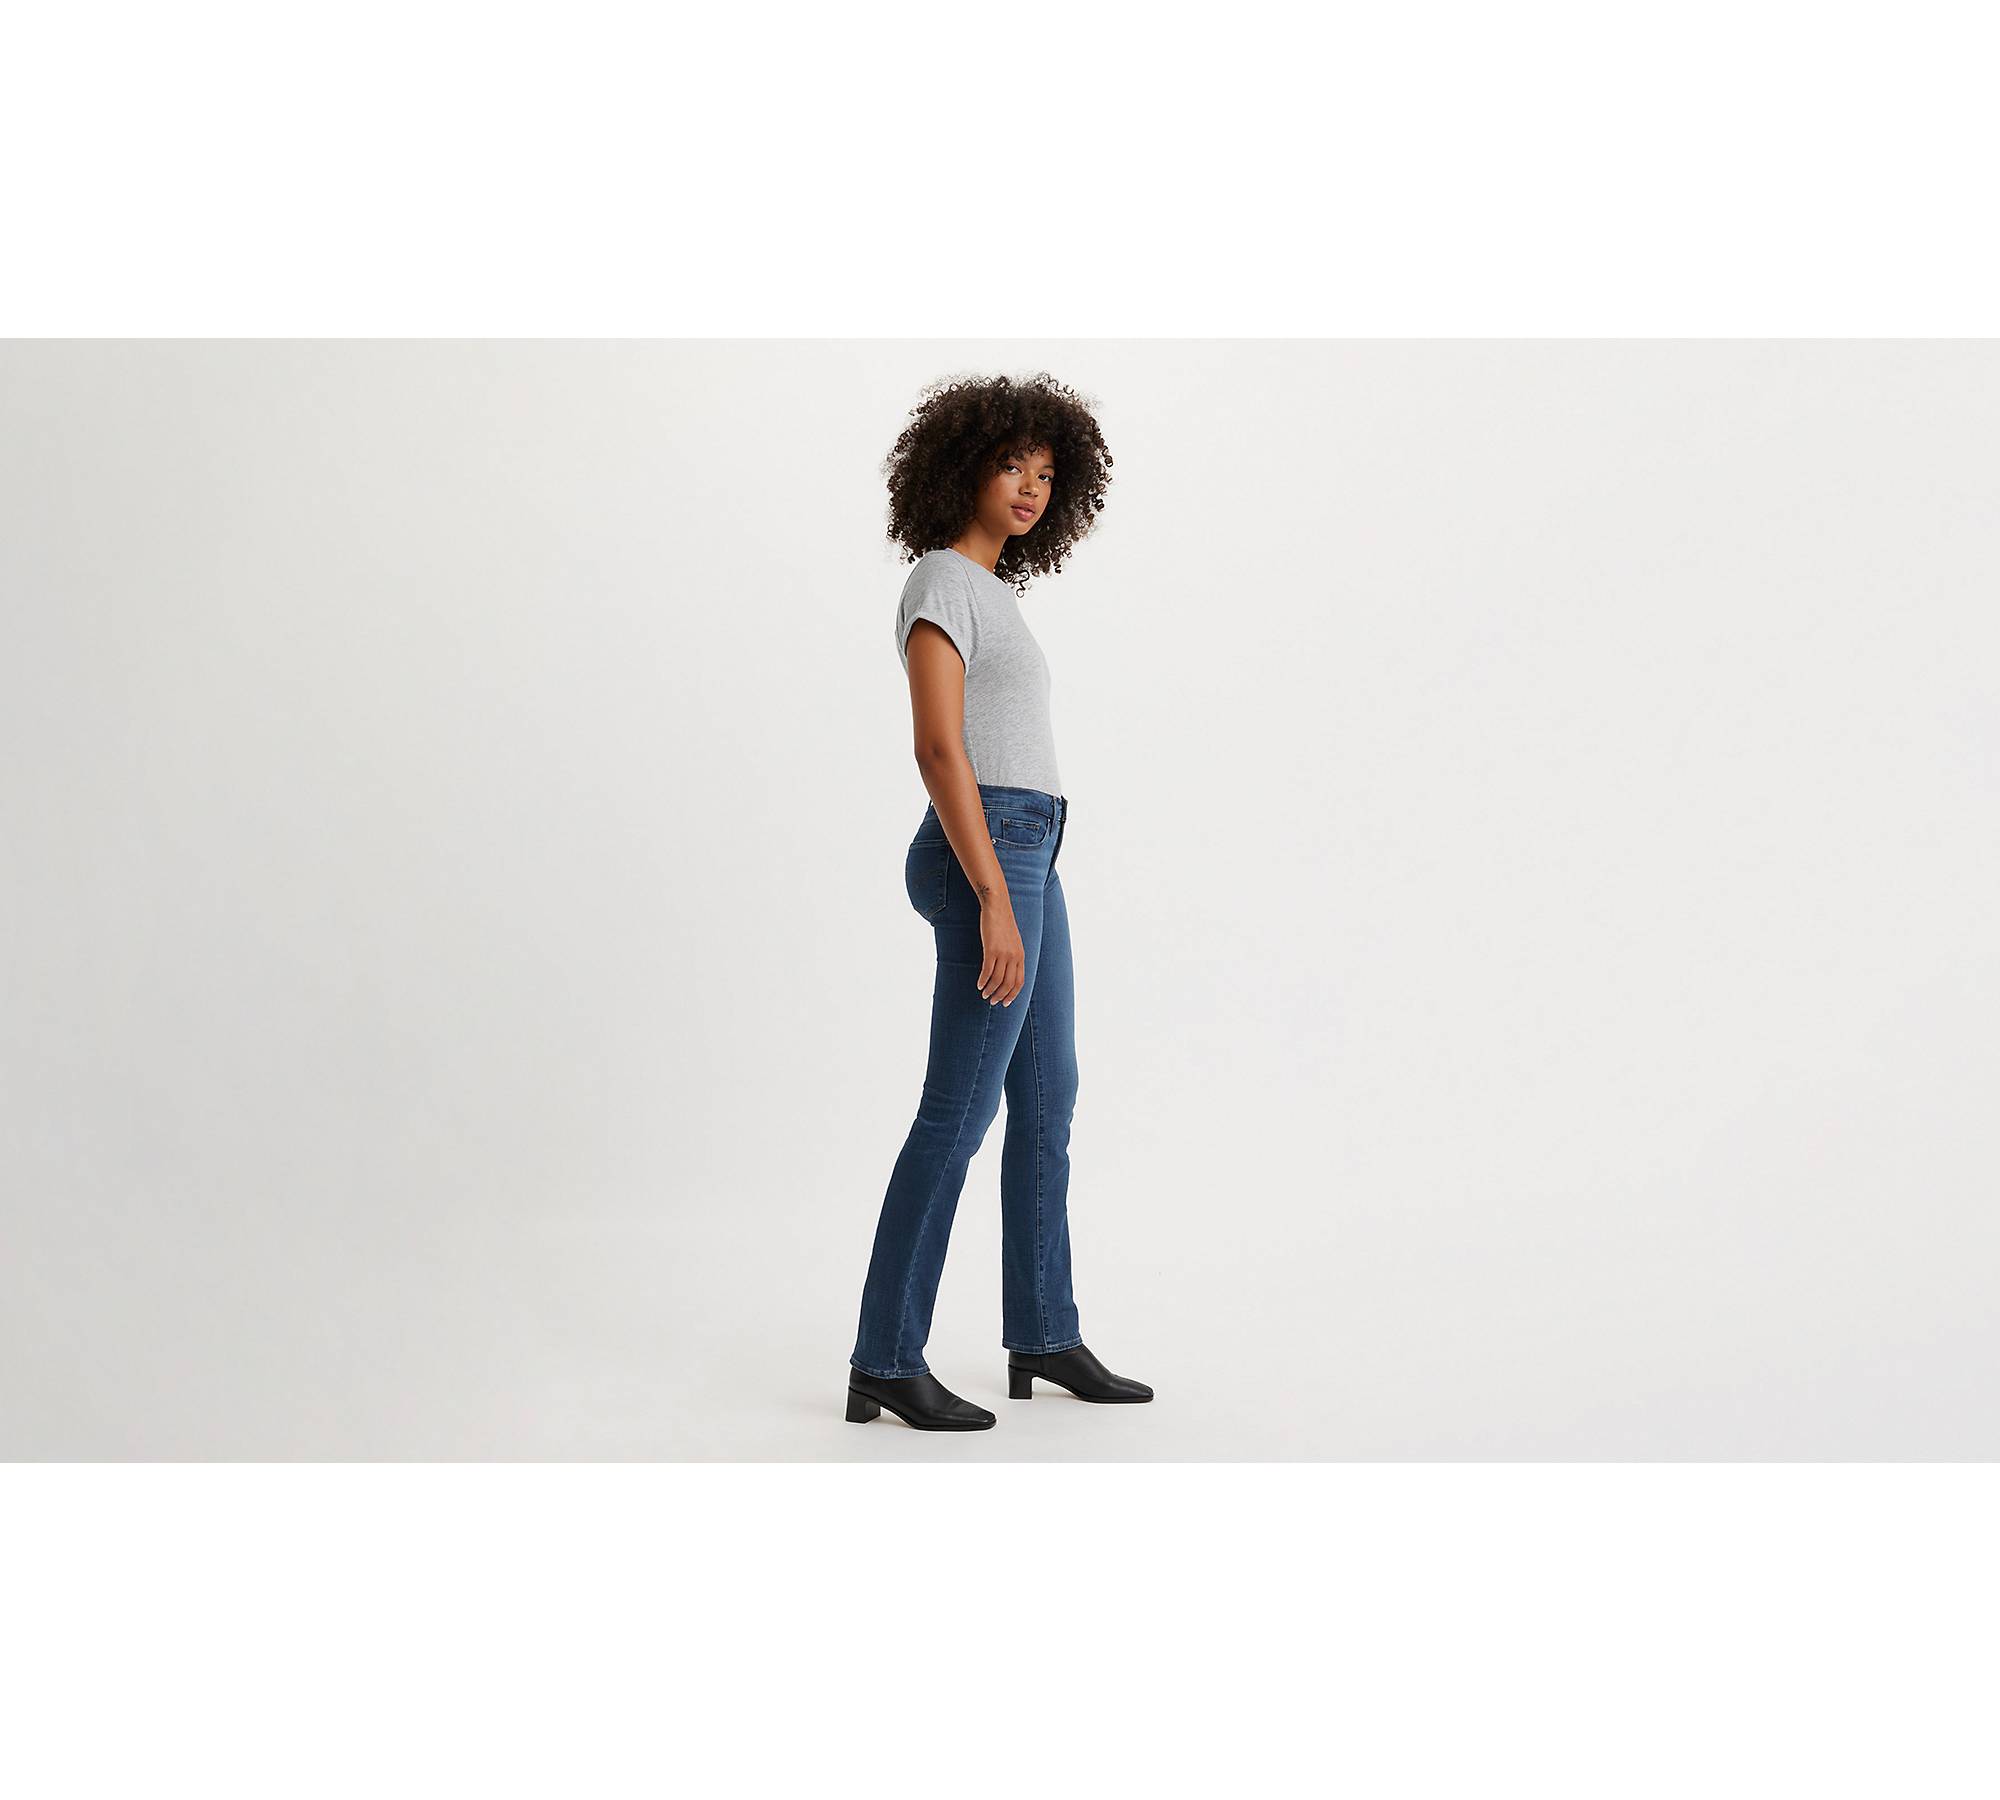 parade rygte rulle 314 Shaping Straight Women's Jeans - Medium Wash | Levi's® US